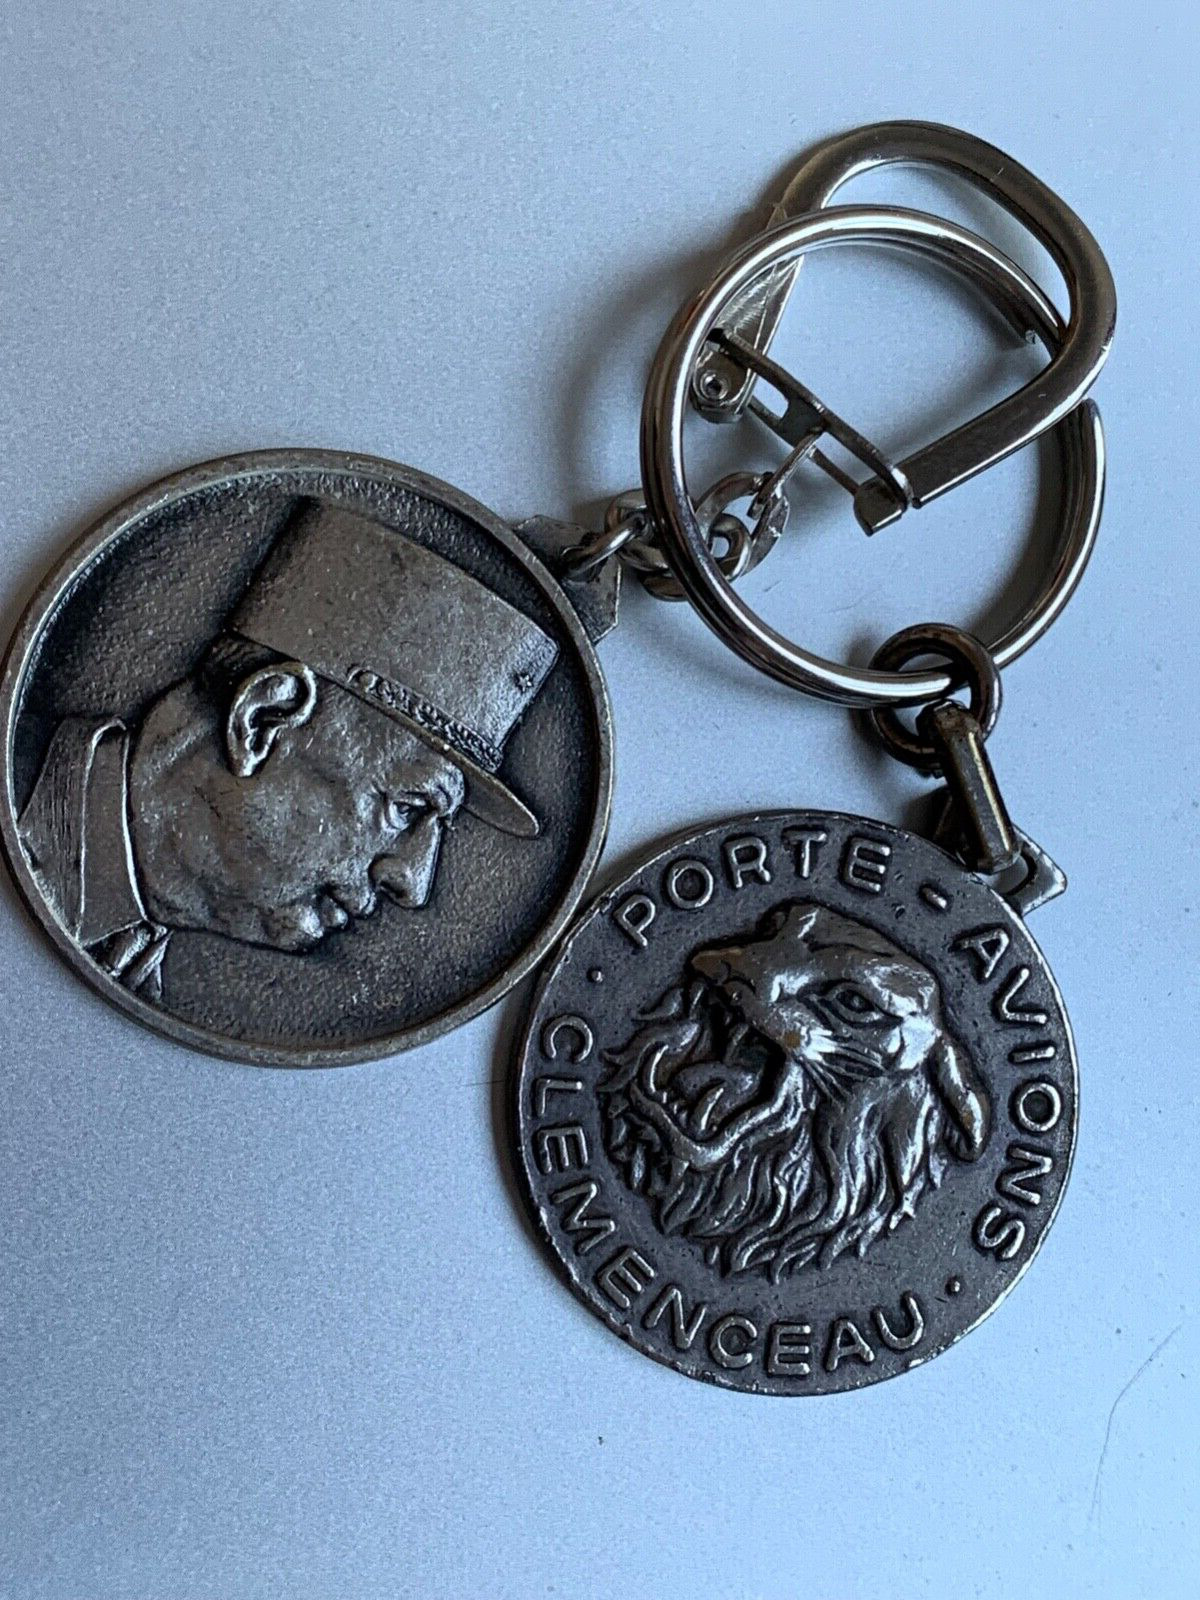 Vintage French Military Key Rings -C. De Gaulle & AIRCRAFT CARRIER CLEMENCEAU